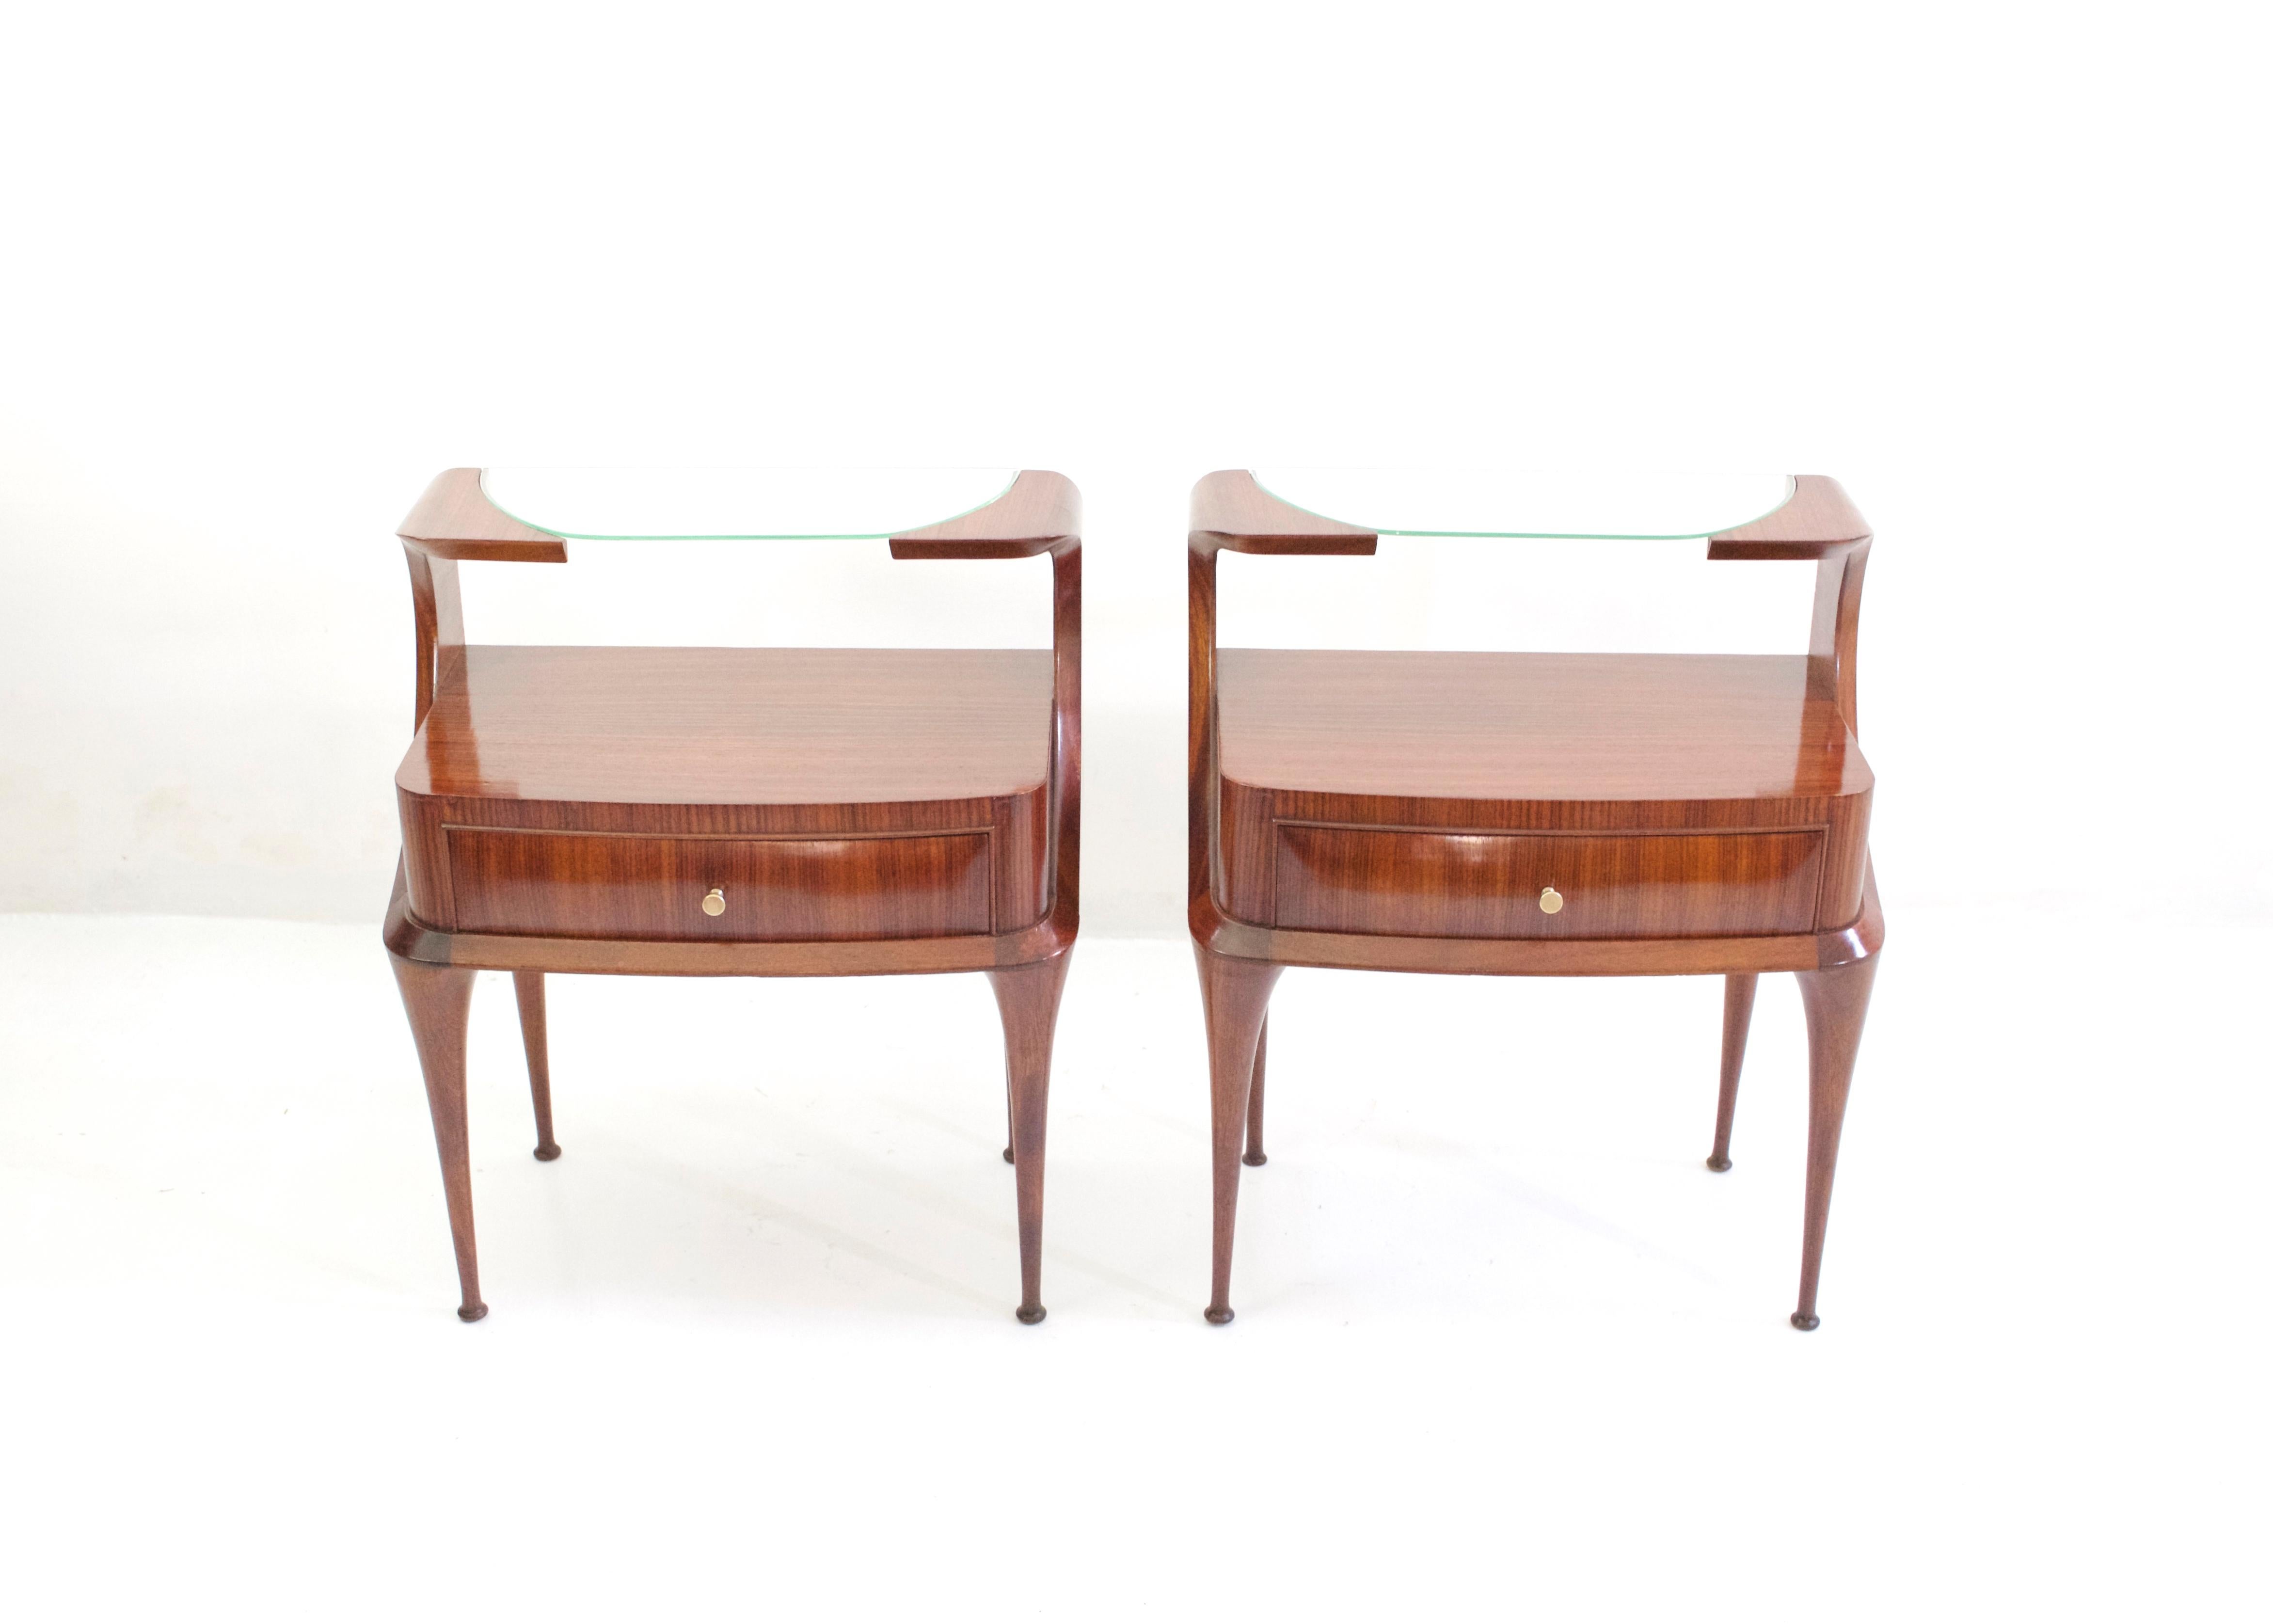 A pair of exceptional nightstands by Vittorio Dassi with magnificent attention to details and craftsmanship. These nightstands has a natural grace and lightness about them from the curves and lines almost making them float and would look great with